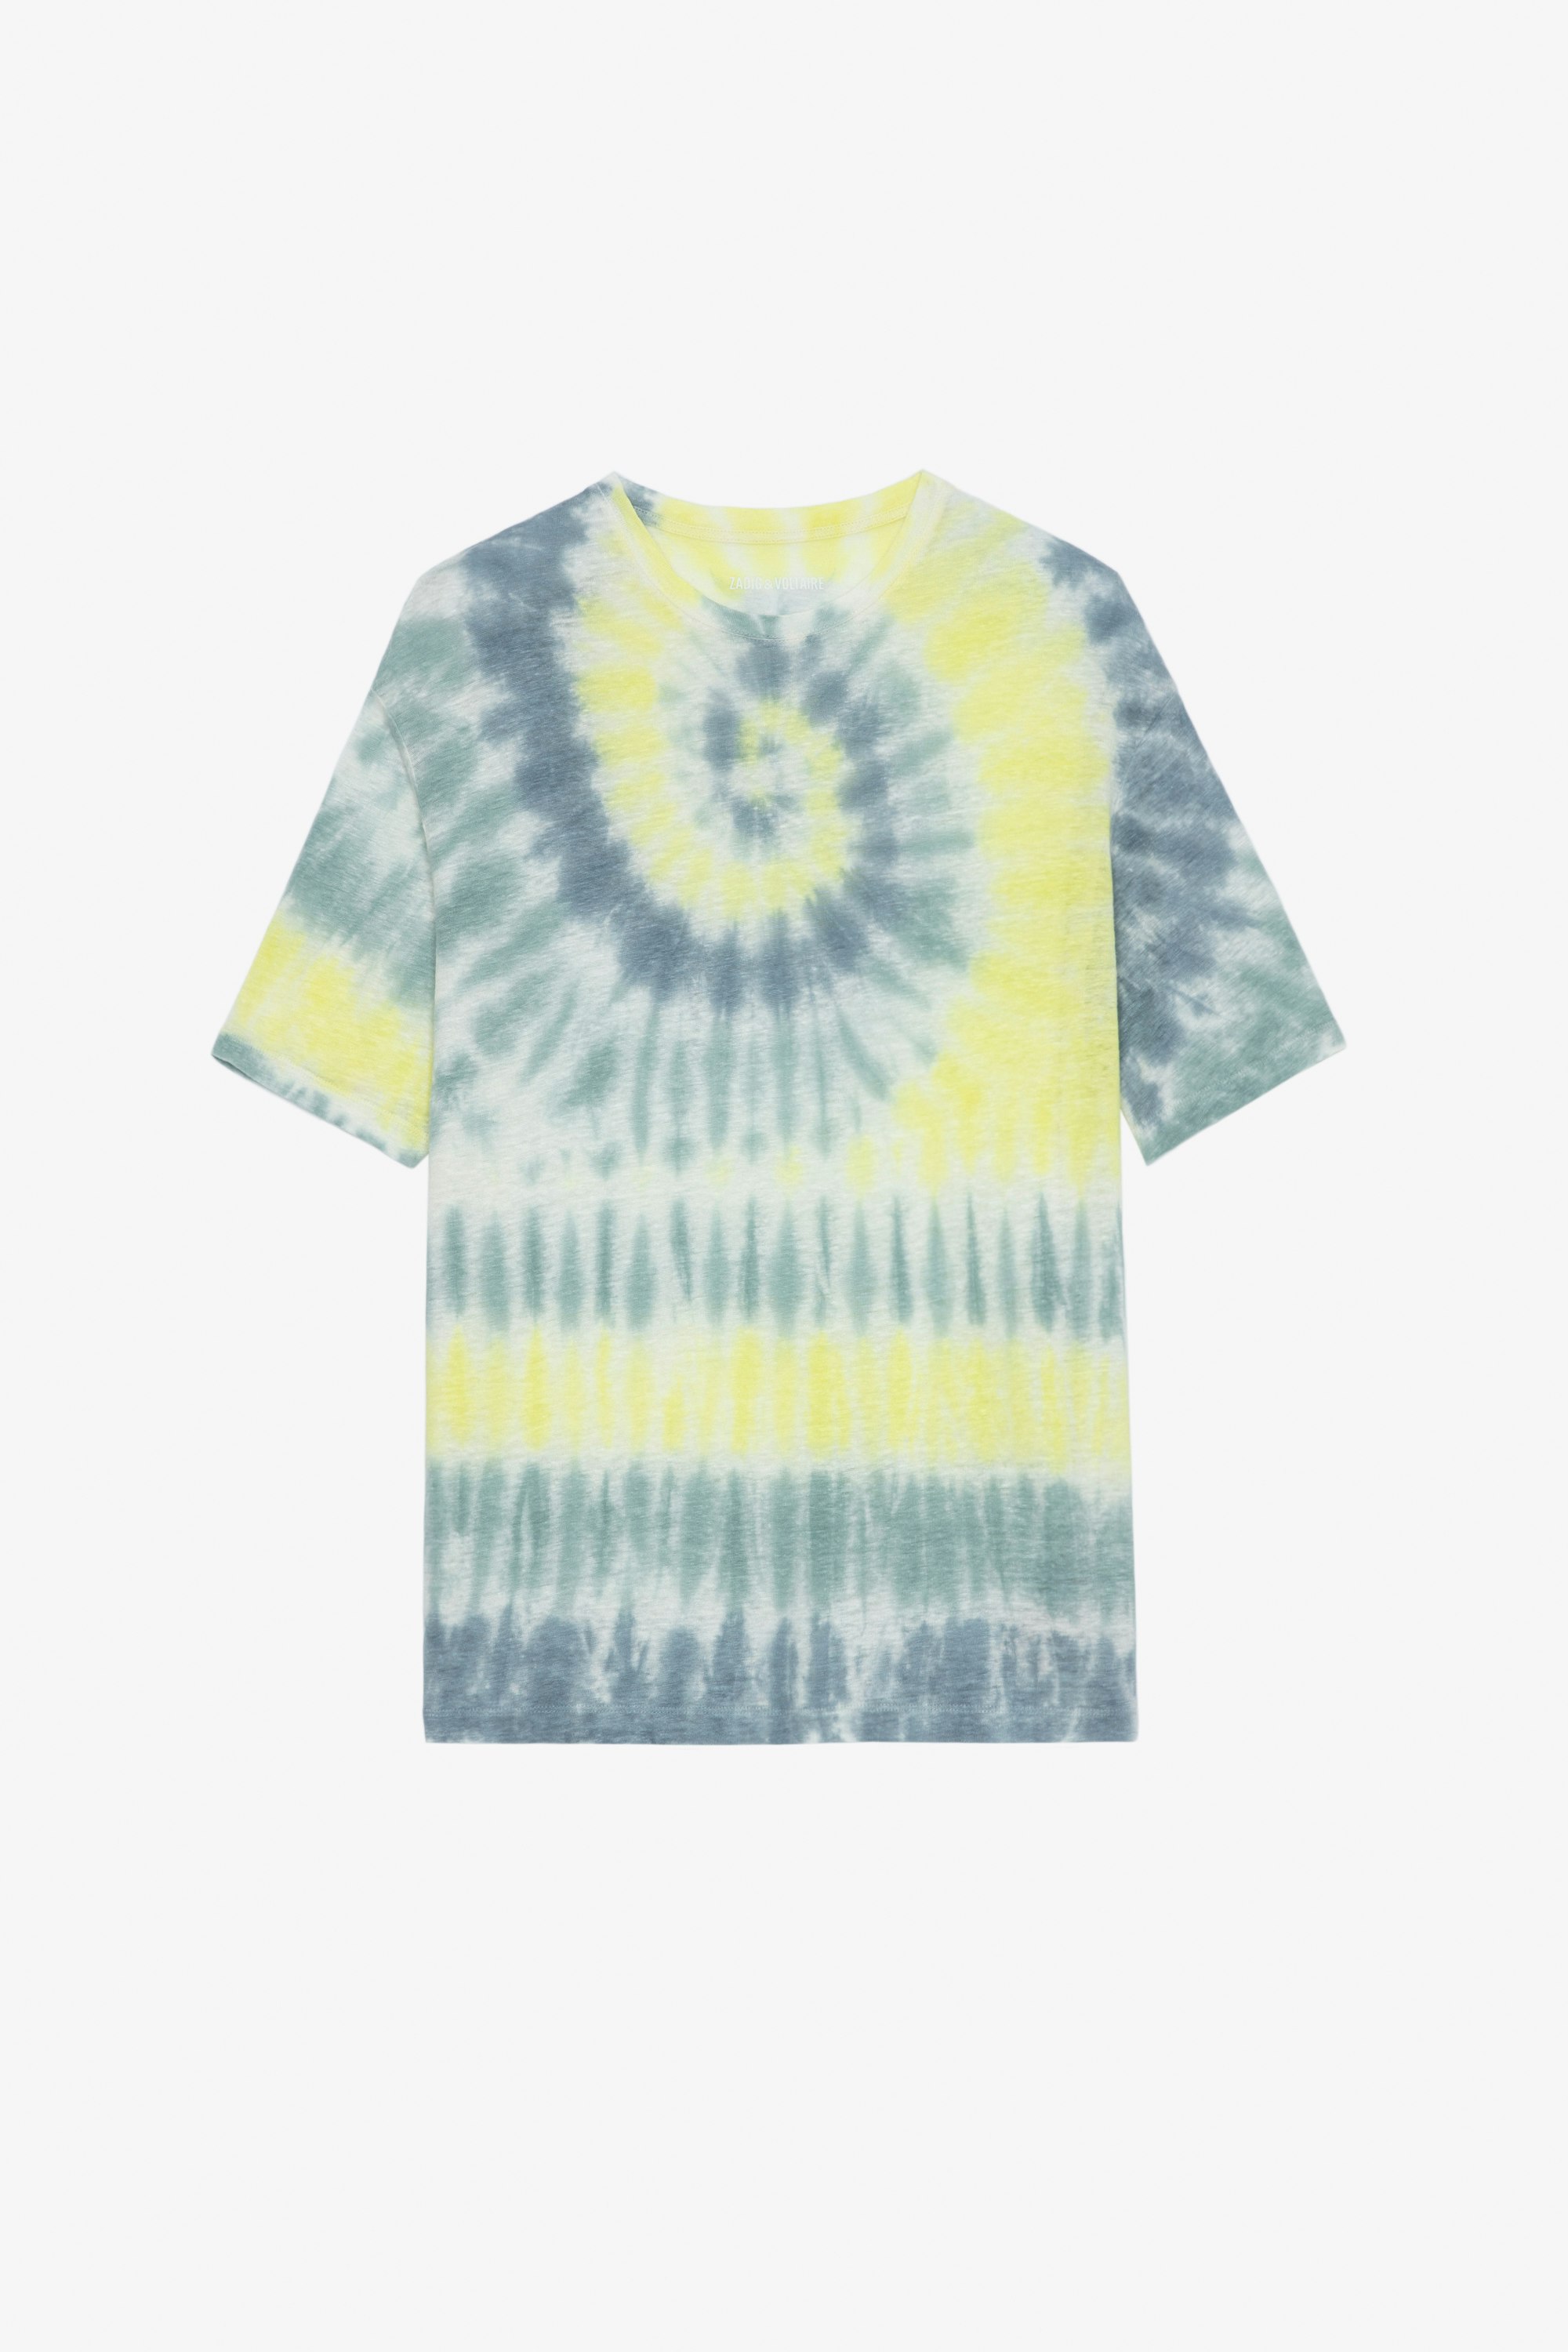 Suzy Linen T-Shirt Women's tie-dye blue and yellow linen t-shirt with wings on the back